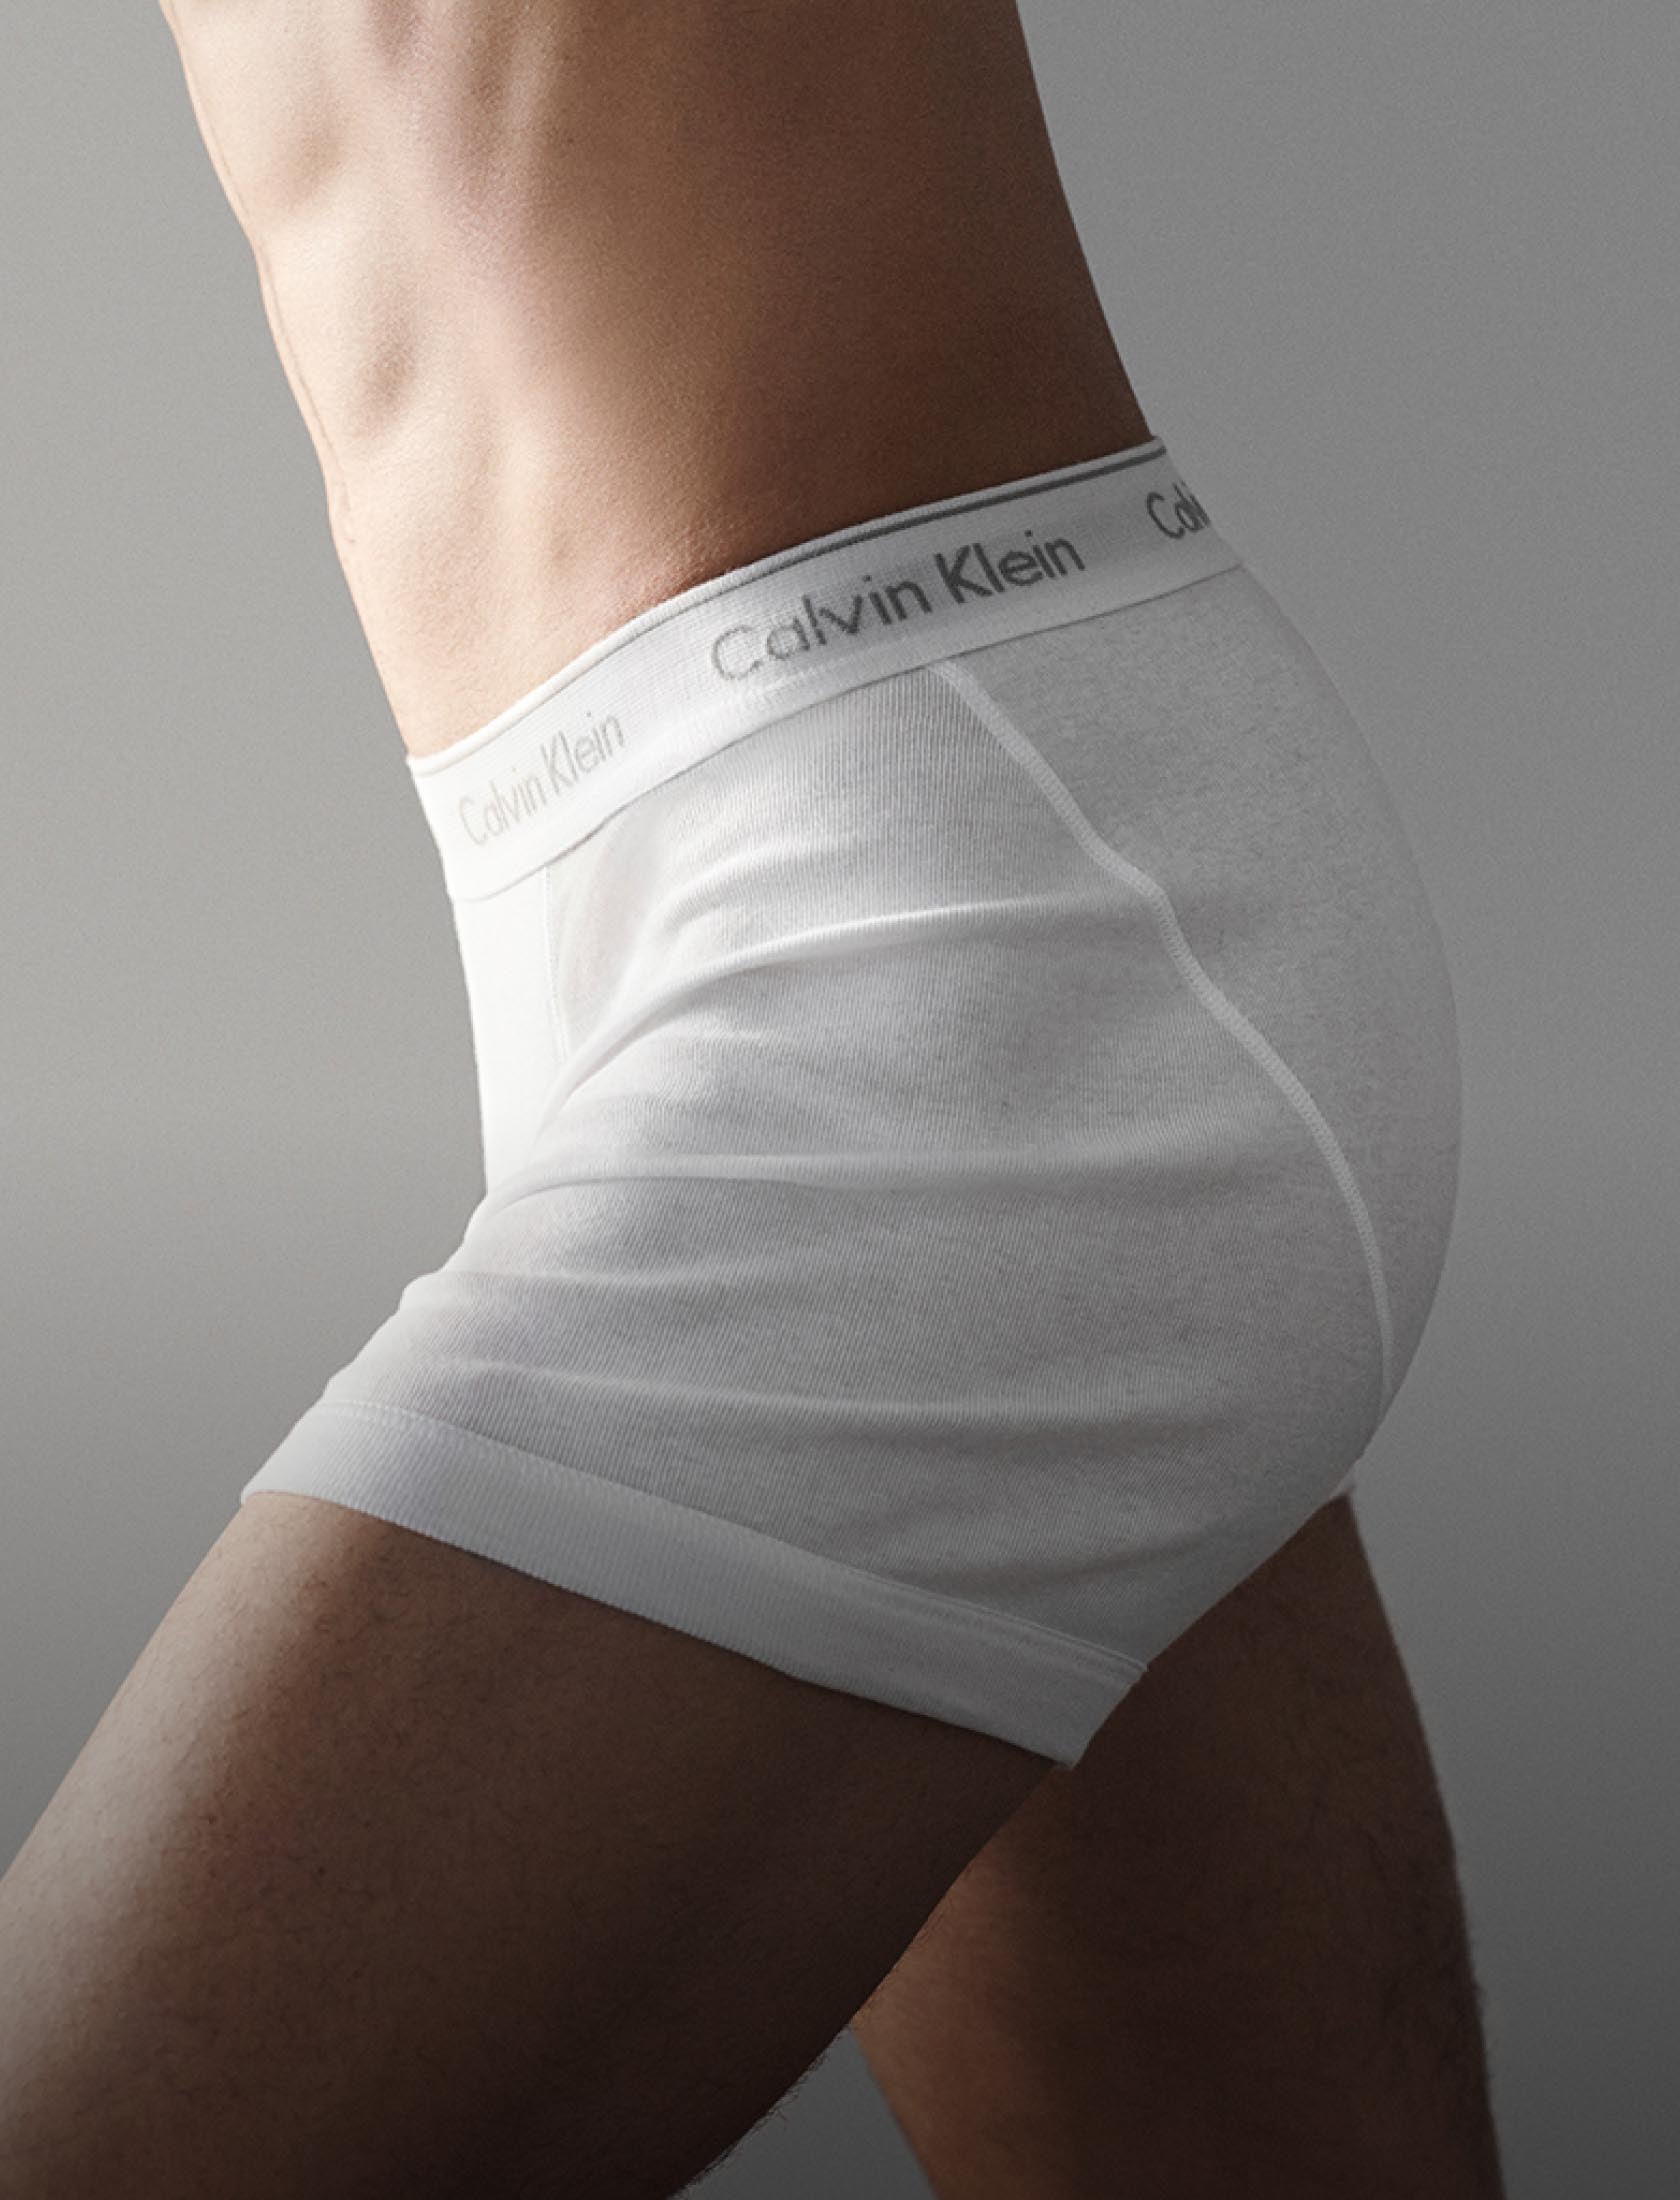 Women's Briefs 100% Cotton-WHT ONLY (3pc) - Wilson Inmate Package